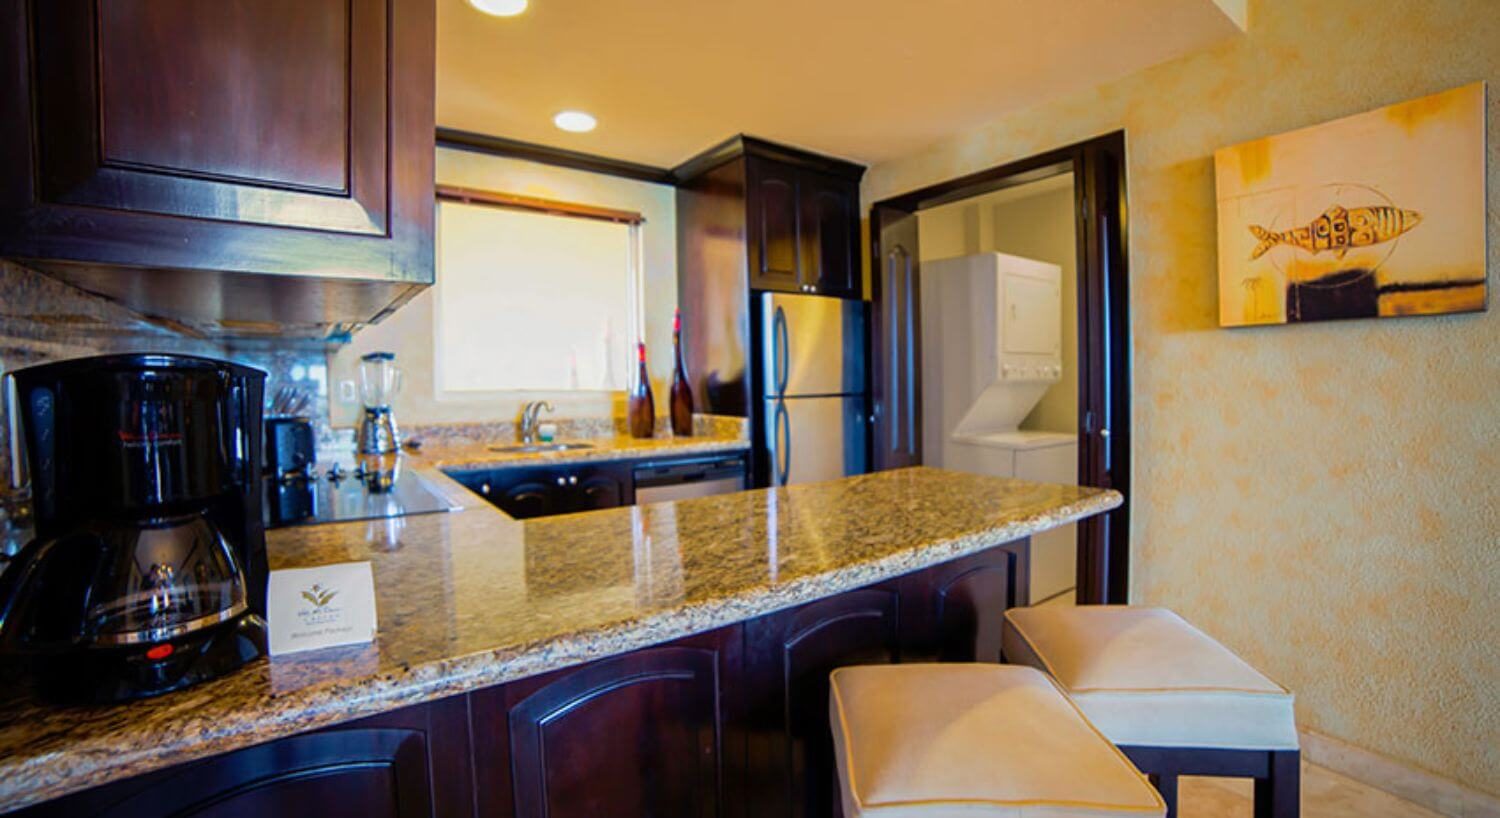 A U-shaped kitchen with dark brown cupboards, granite countertops, stainless steel appliances, coffeemaker, blender, two barstools at the breakfast bar, and an open doorway into a laundry room with stacked washer and dryer.